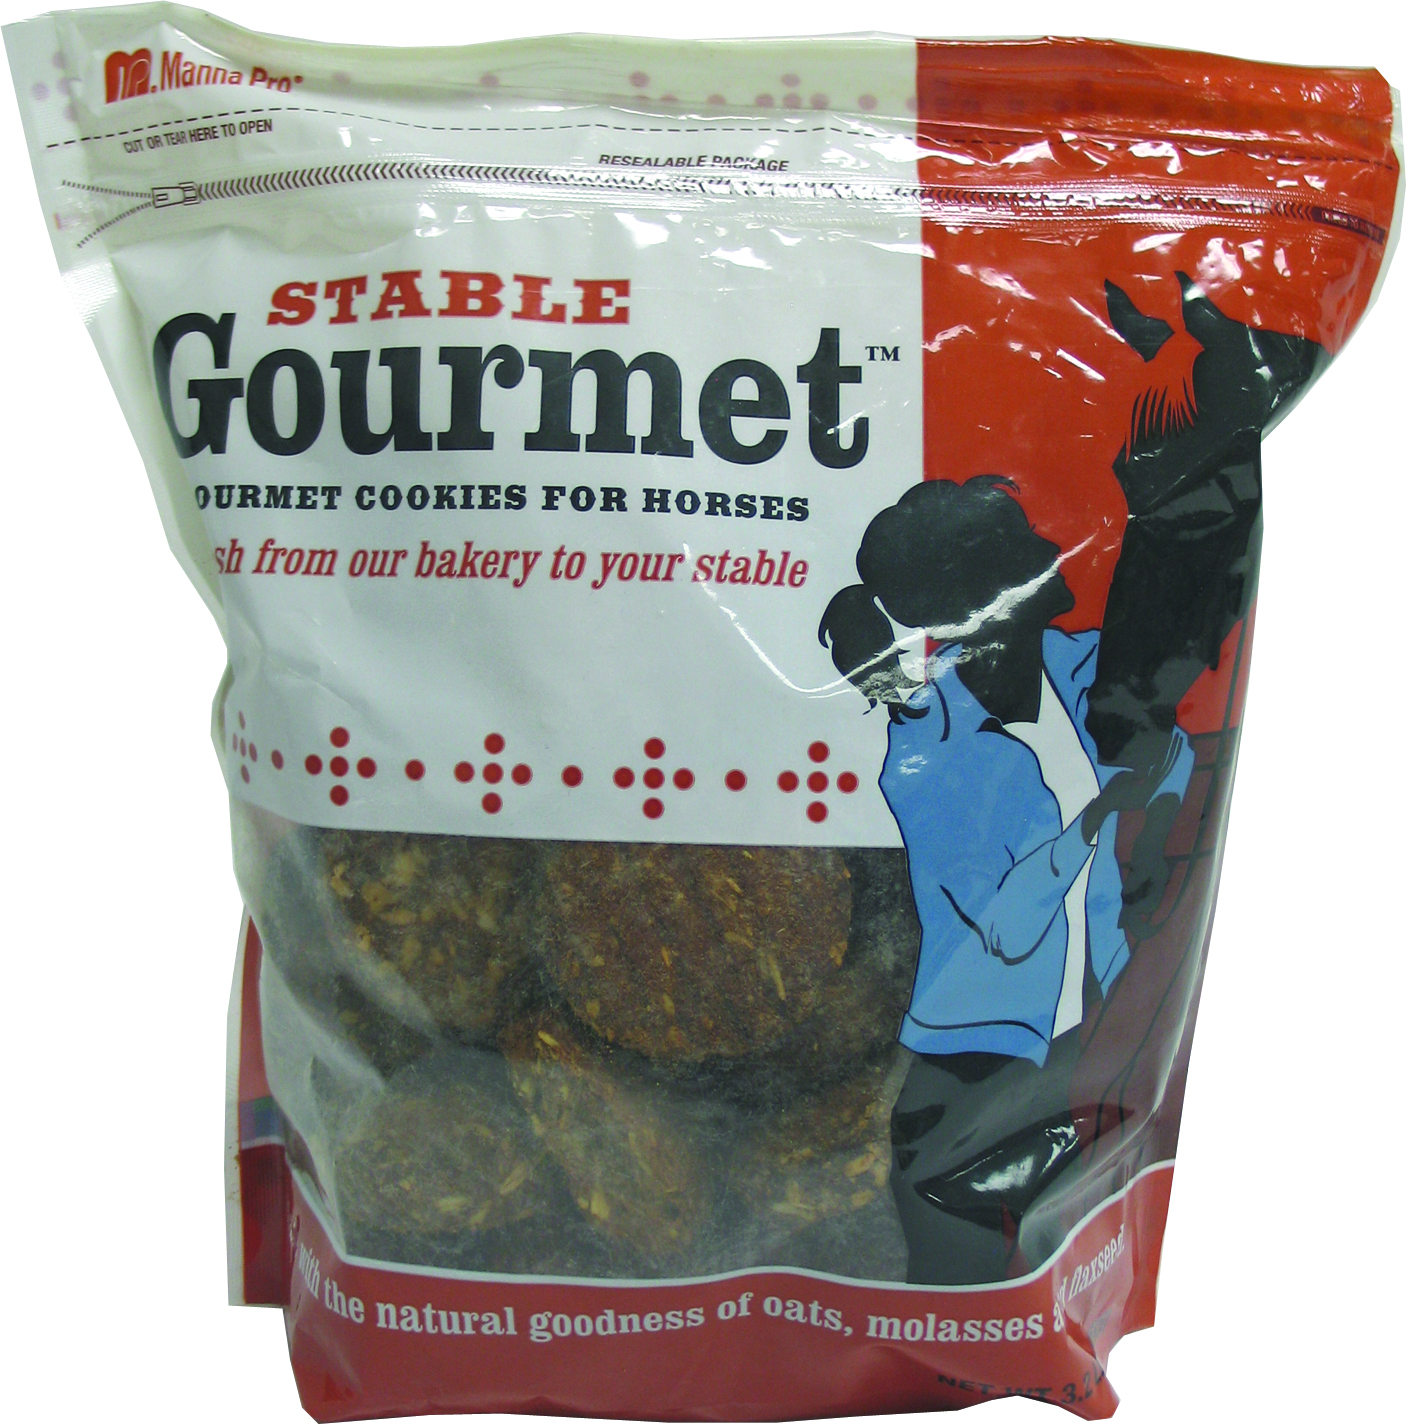 STABLE GOURMET